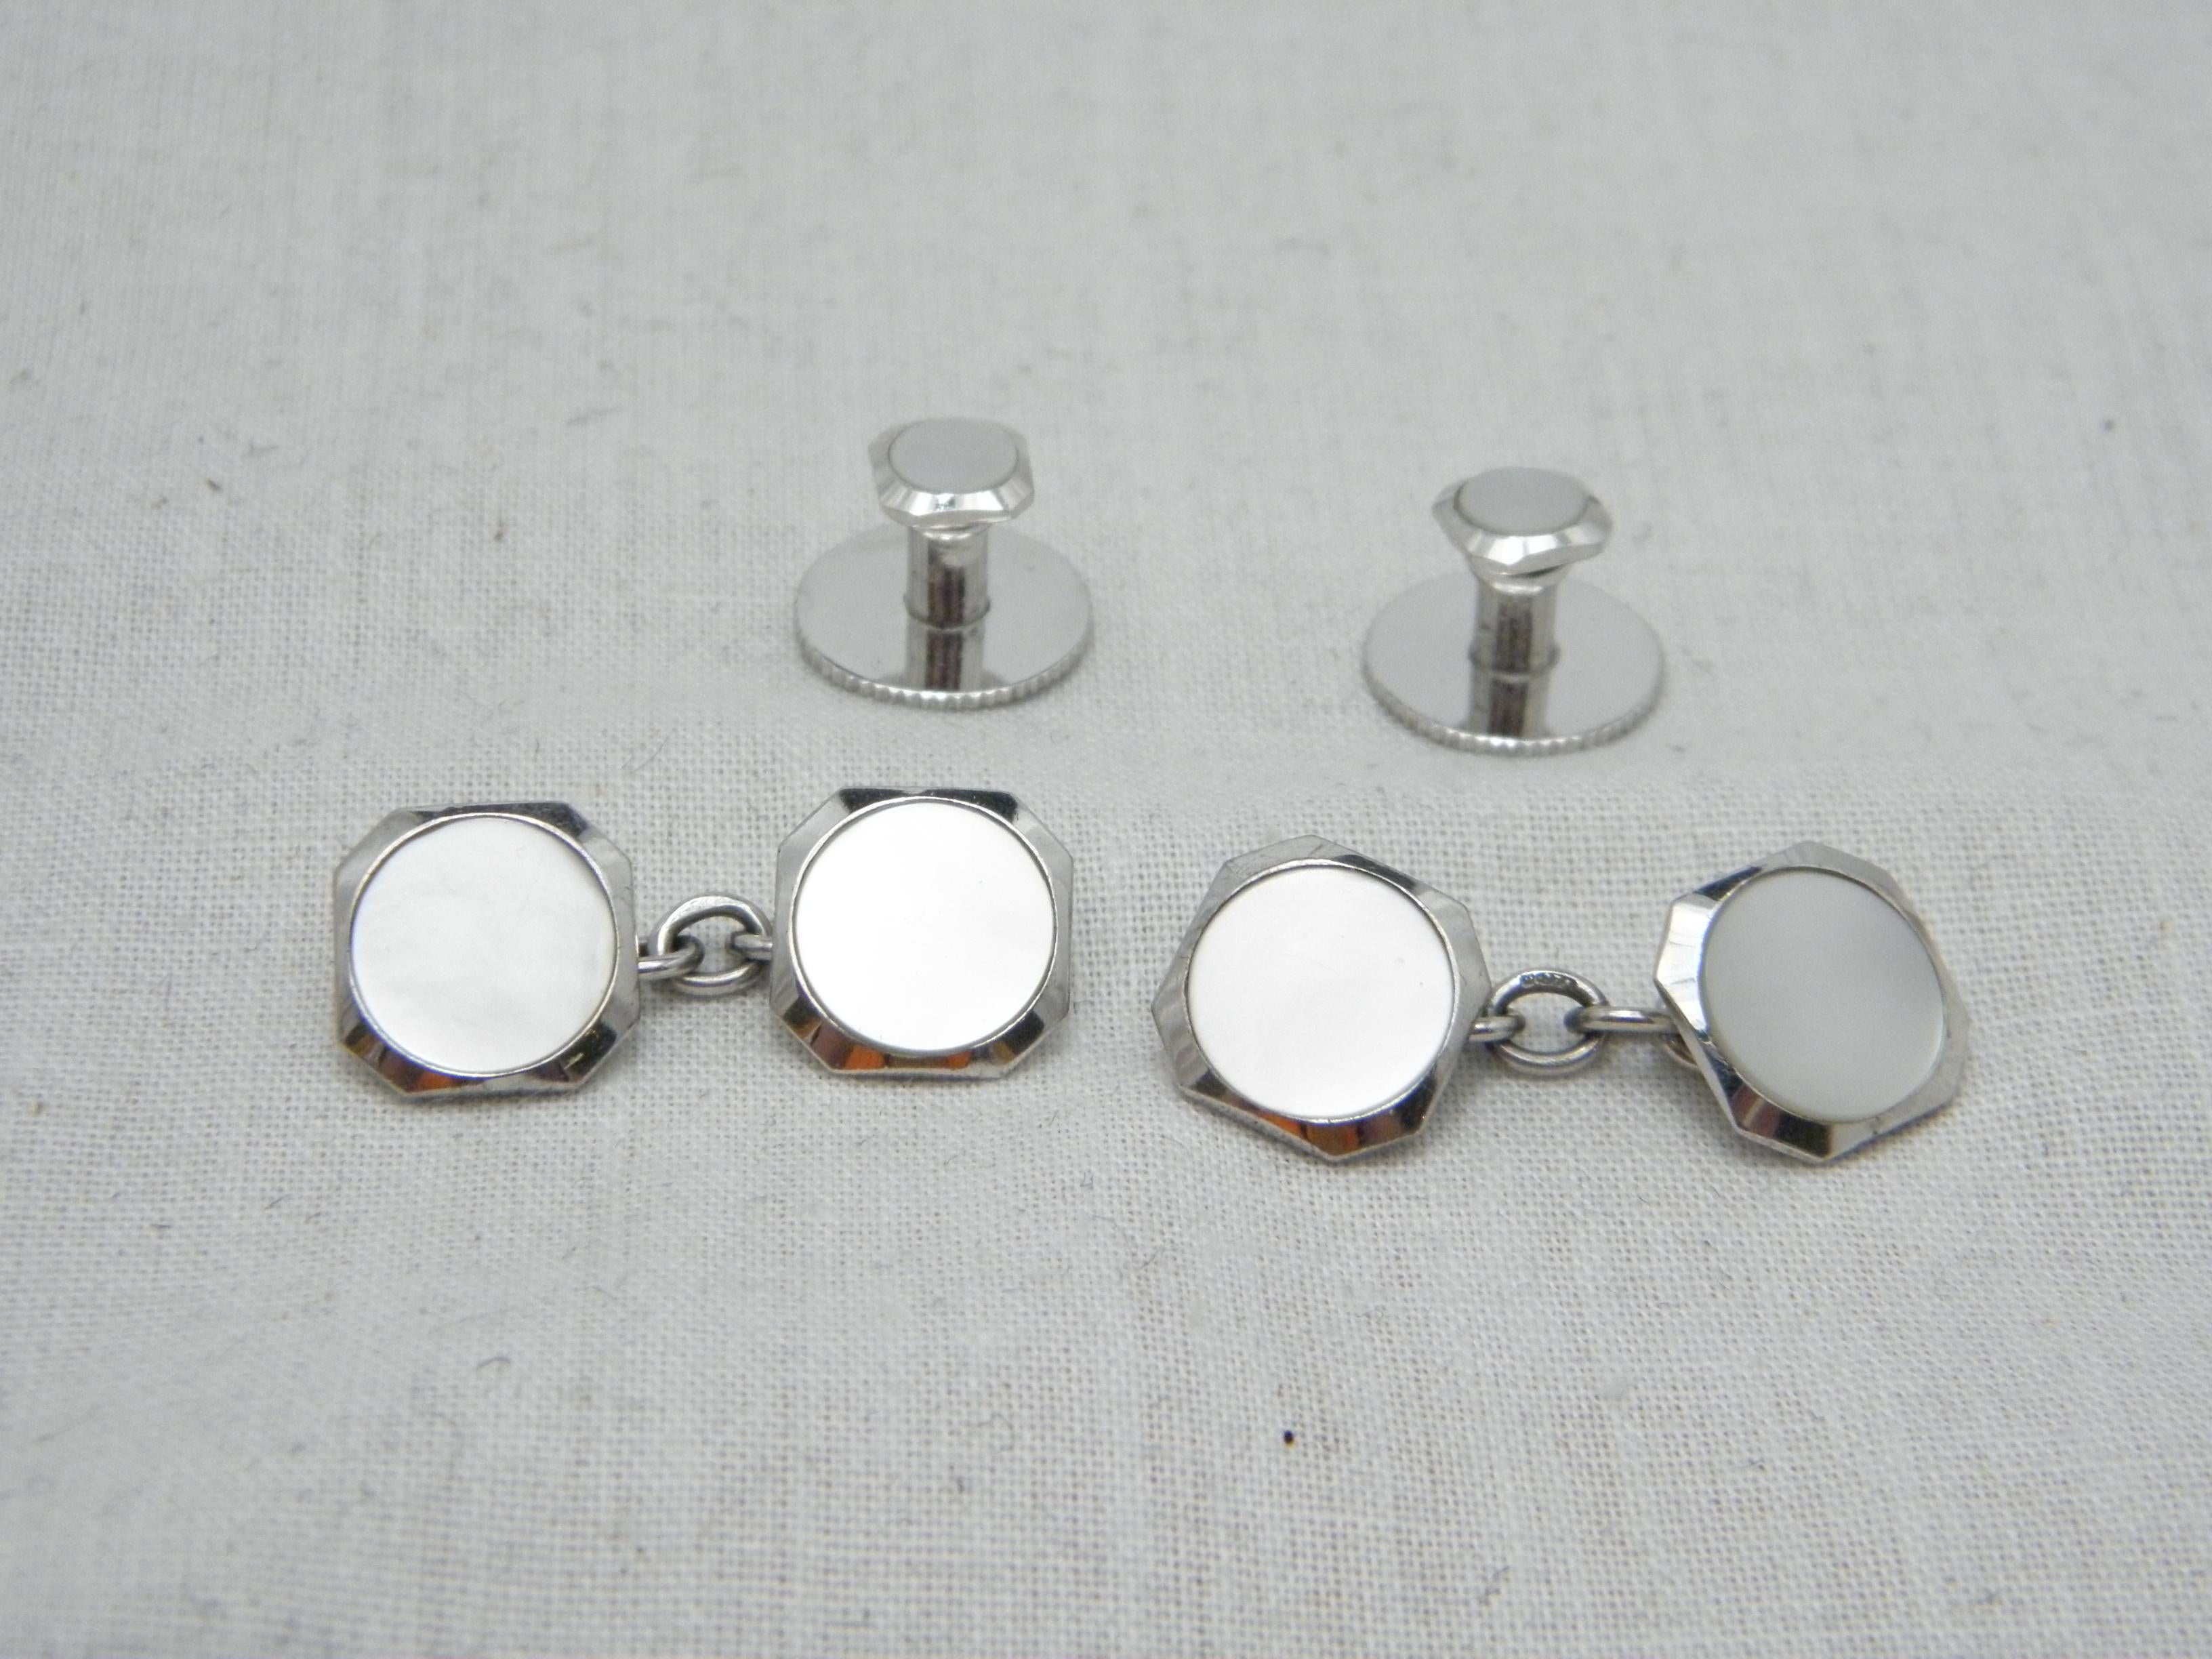 Contemporary Vintage 9ct White Gold Cufflinks Collar Stud Set 375 Purity Heavy 8.2g Cuff Link For Sale